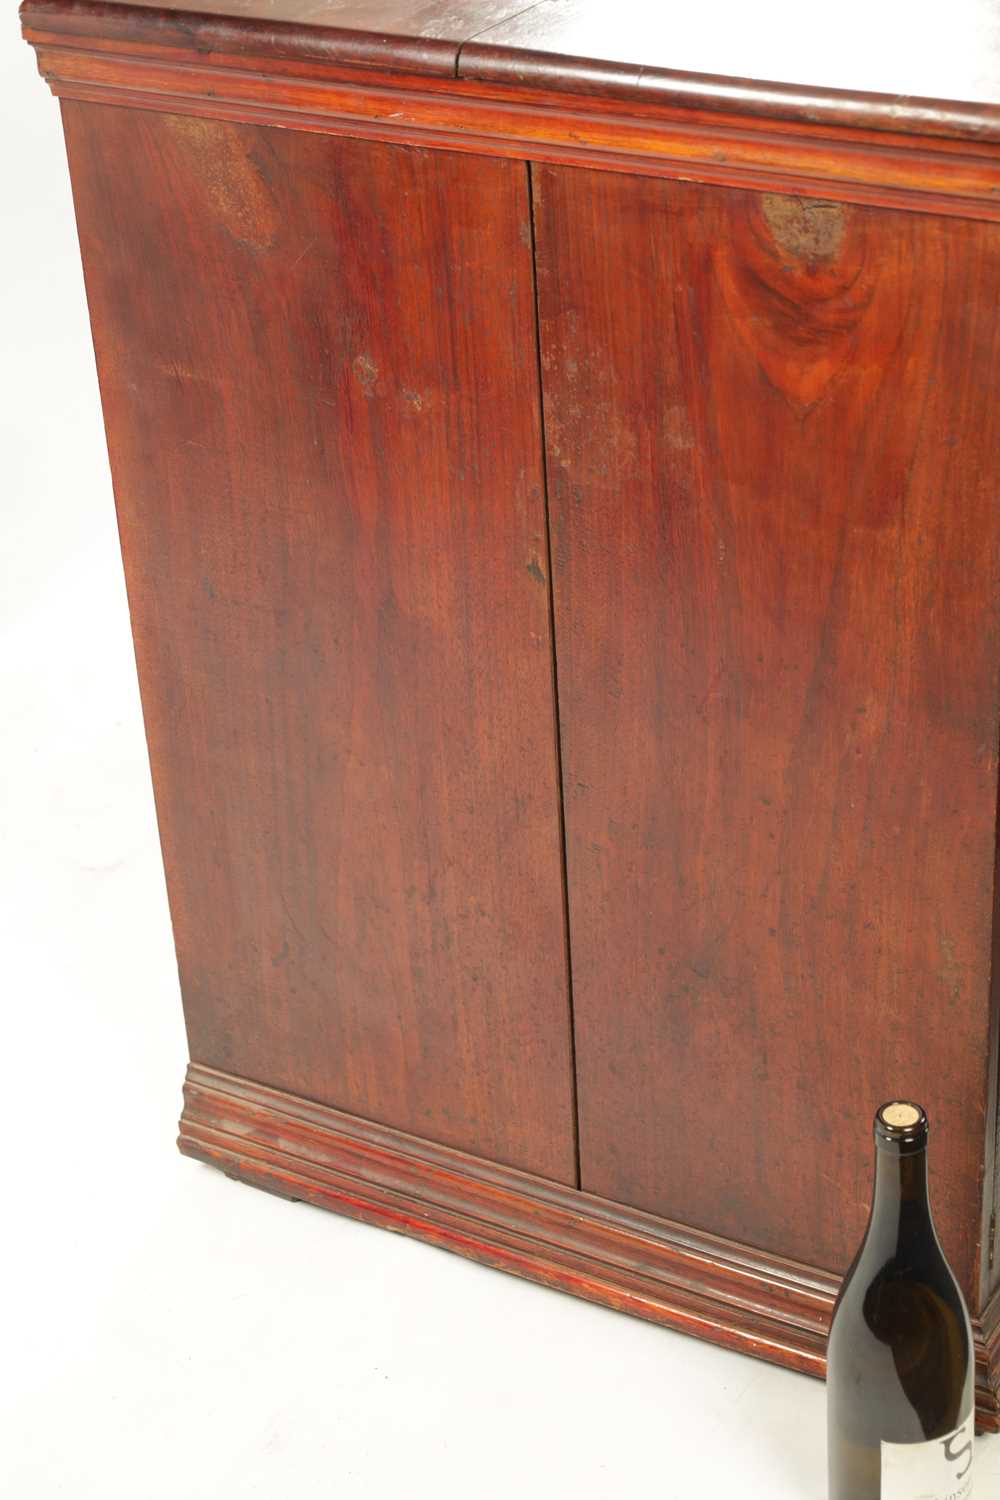 A LATE 19TH CENTURY SCUMBLED PINE COLLECTORS CABINET - Image 5 of 8